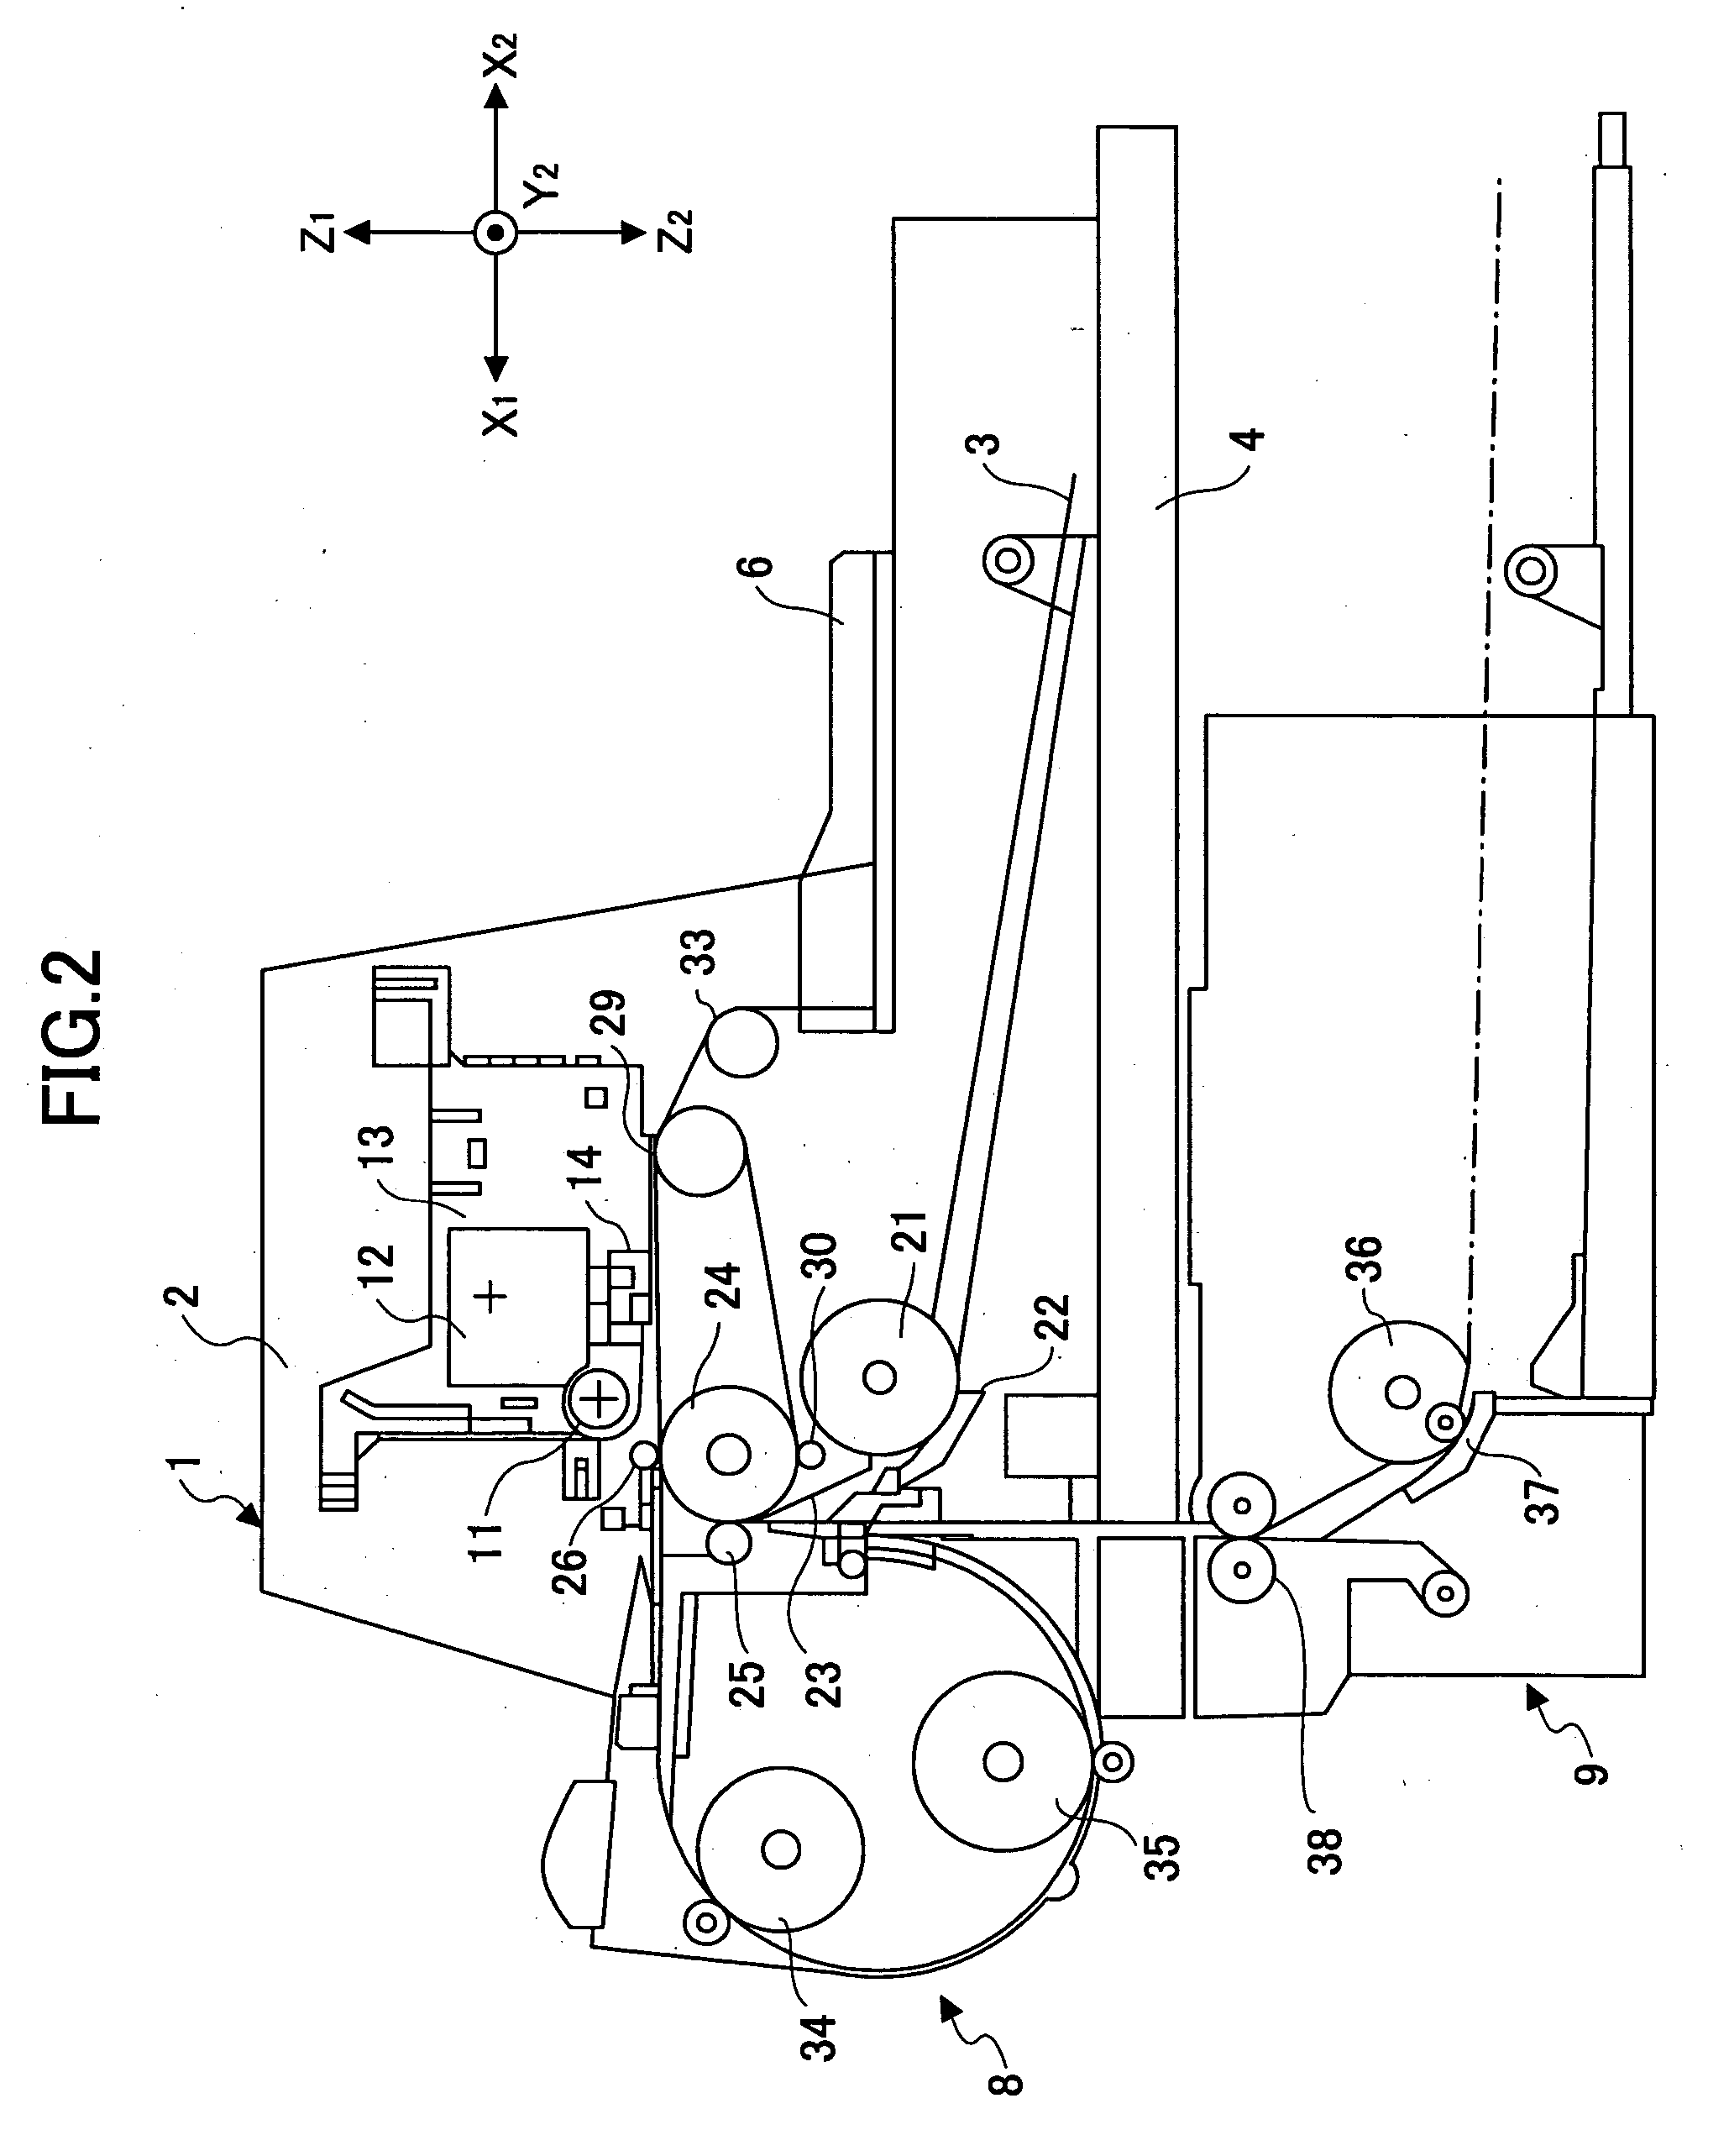 Inkjet carriage unit, inkjet recording apparatus, and image forming apparatus